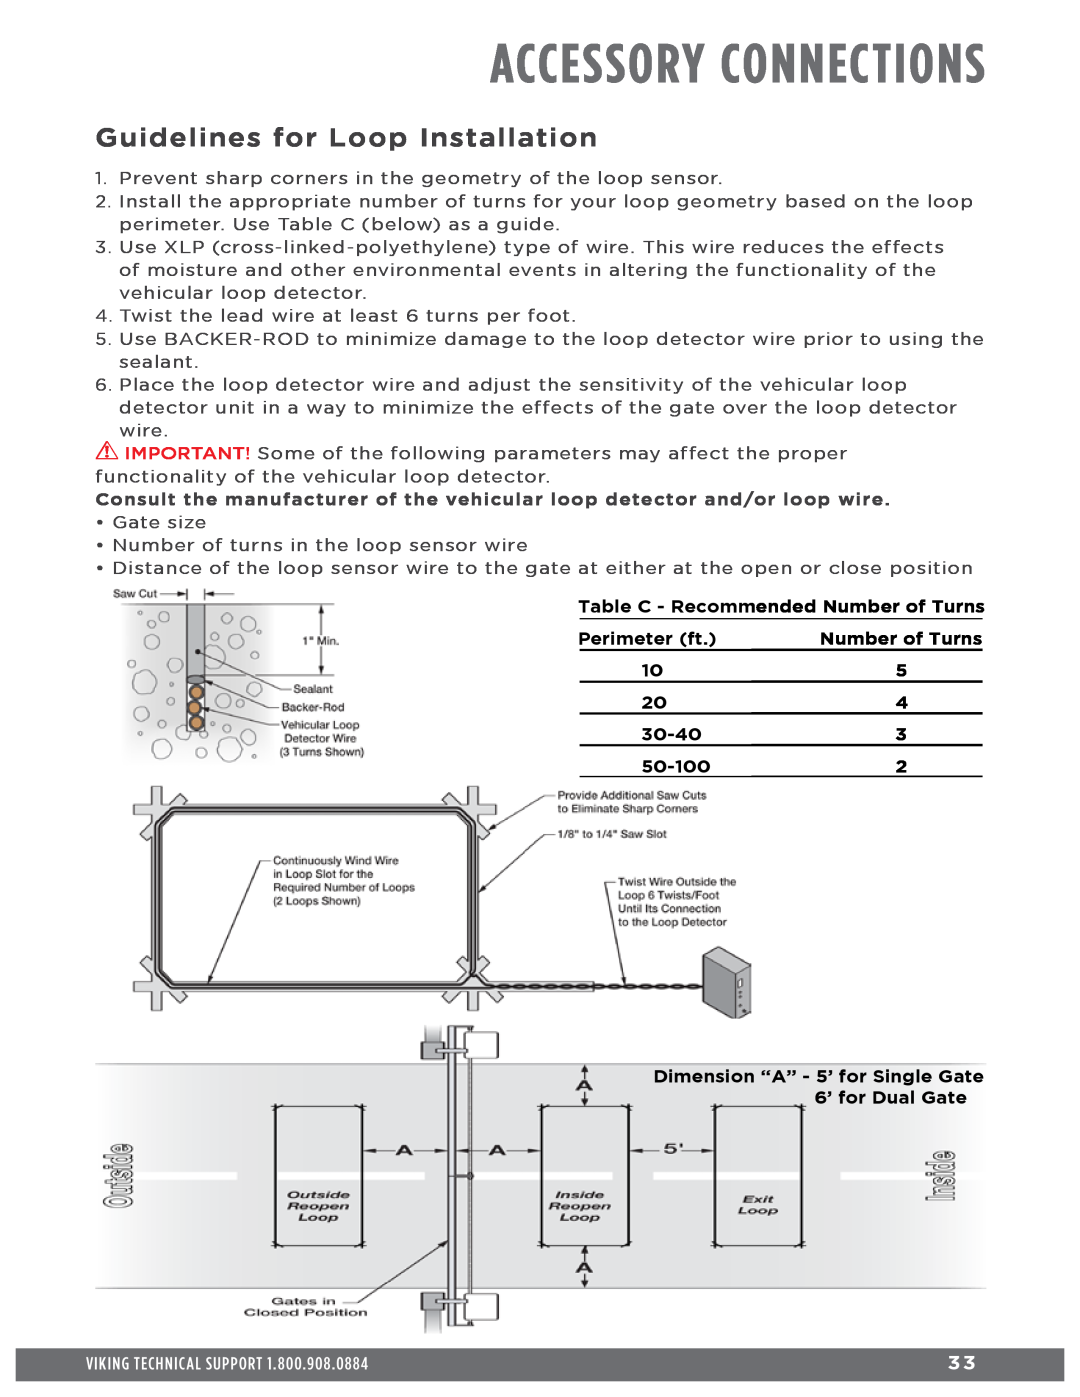 Viking Access Systems Q7 manual Accessory Connections, Guidelines for Loop Installation, Viking Technical Support 